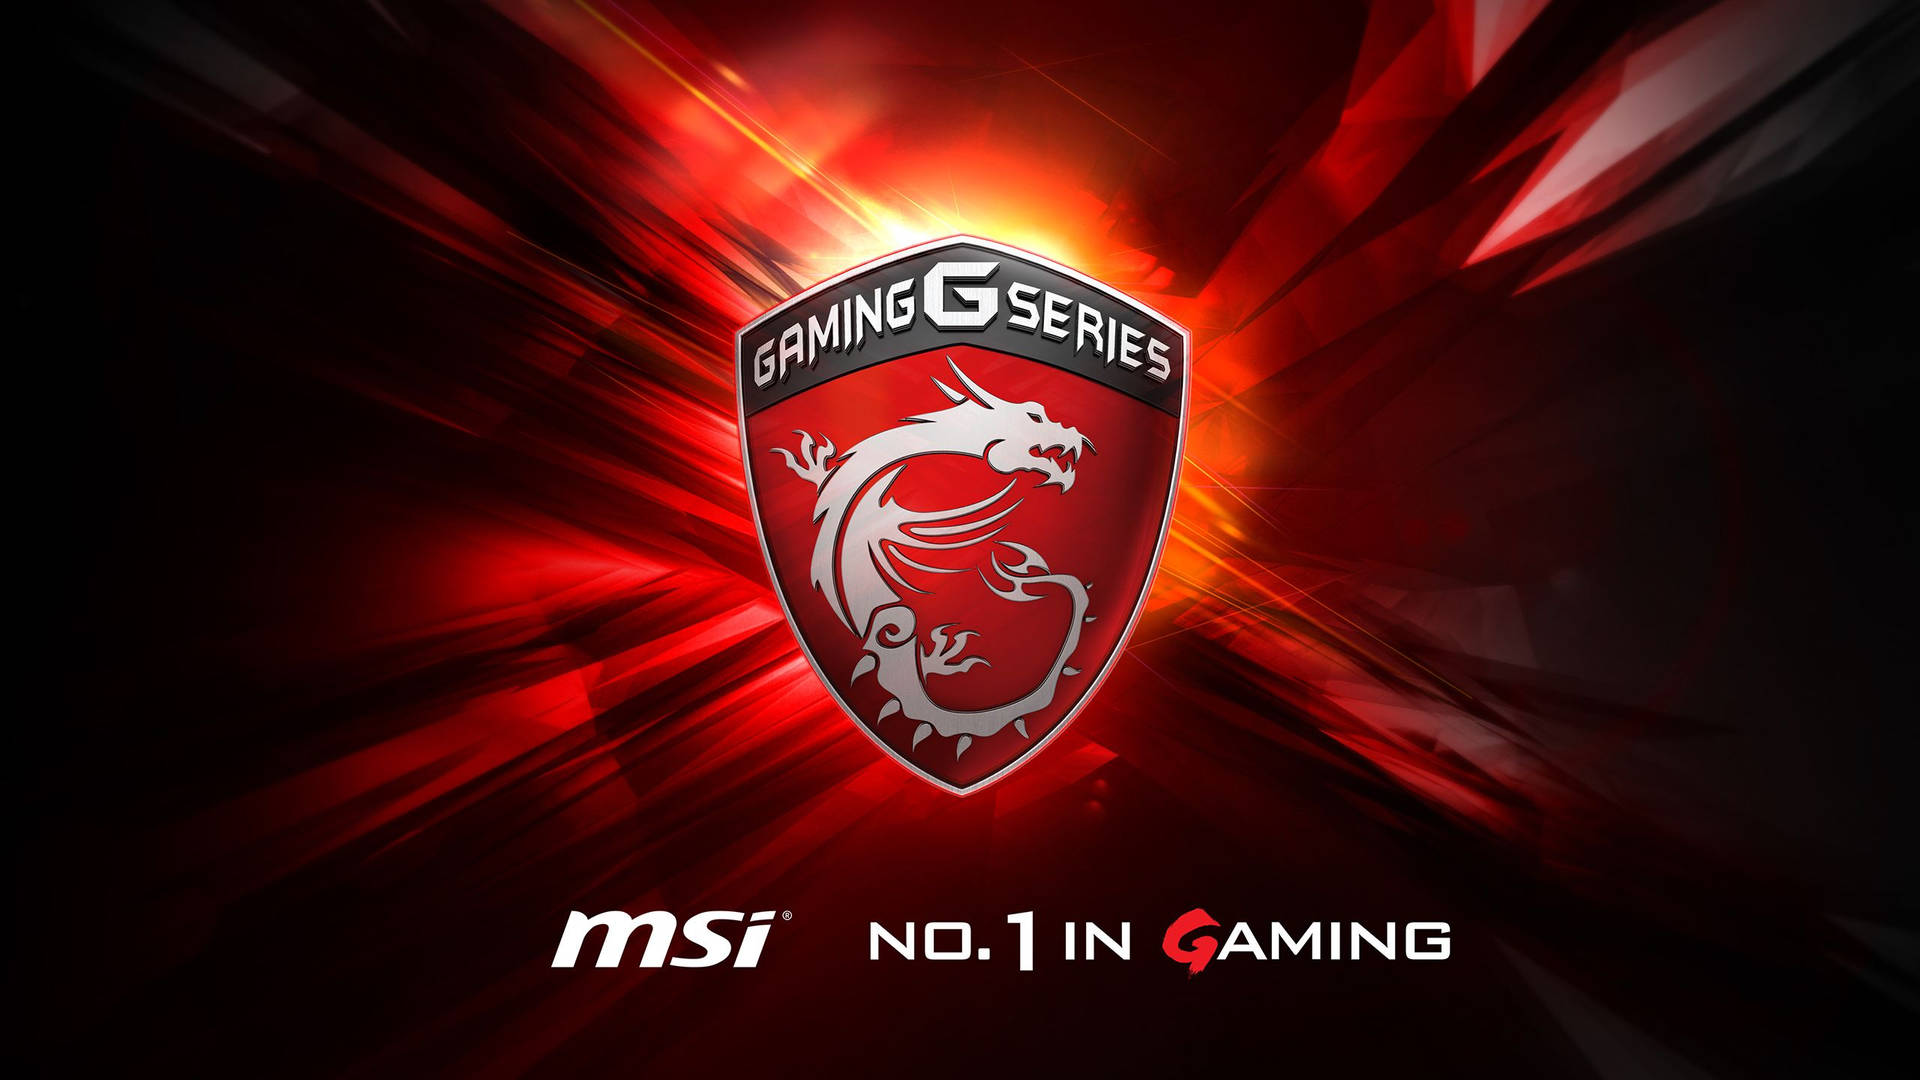 Gaming just got better with the MSI Gaming G Series Wallpaper